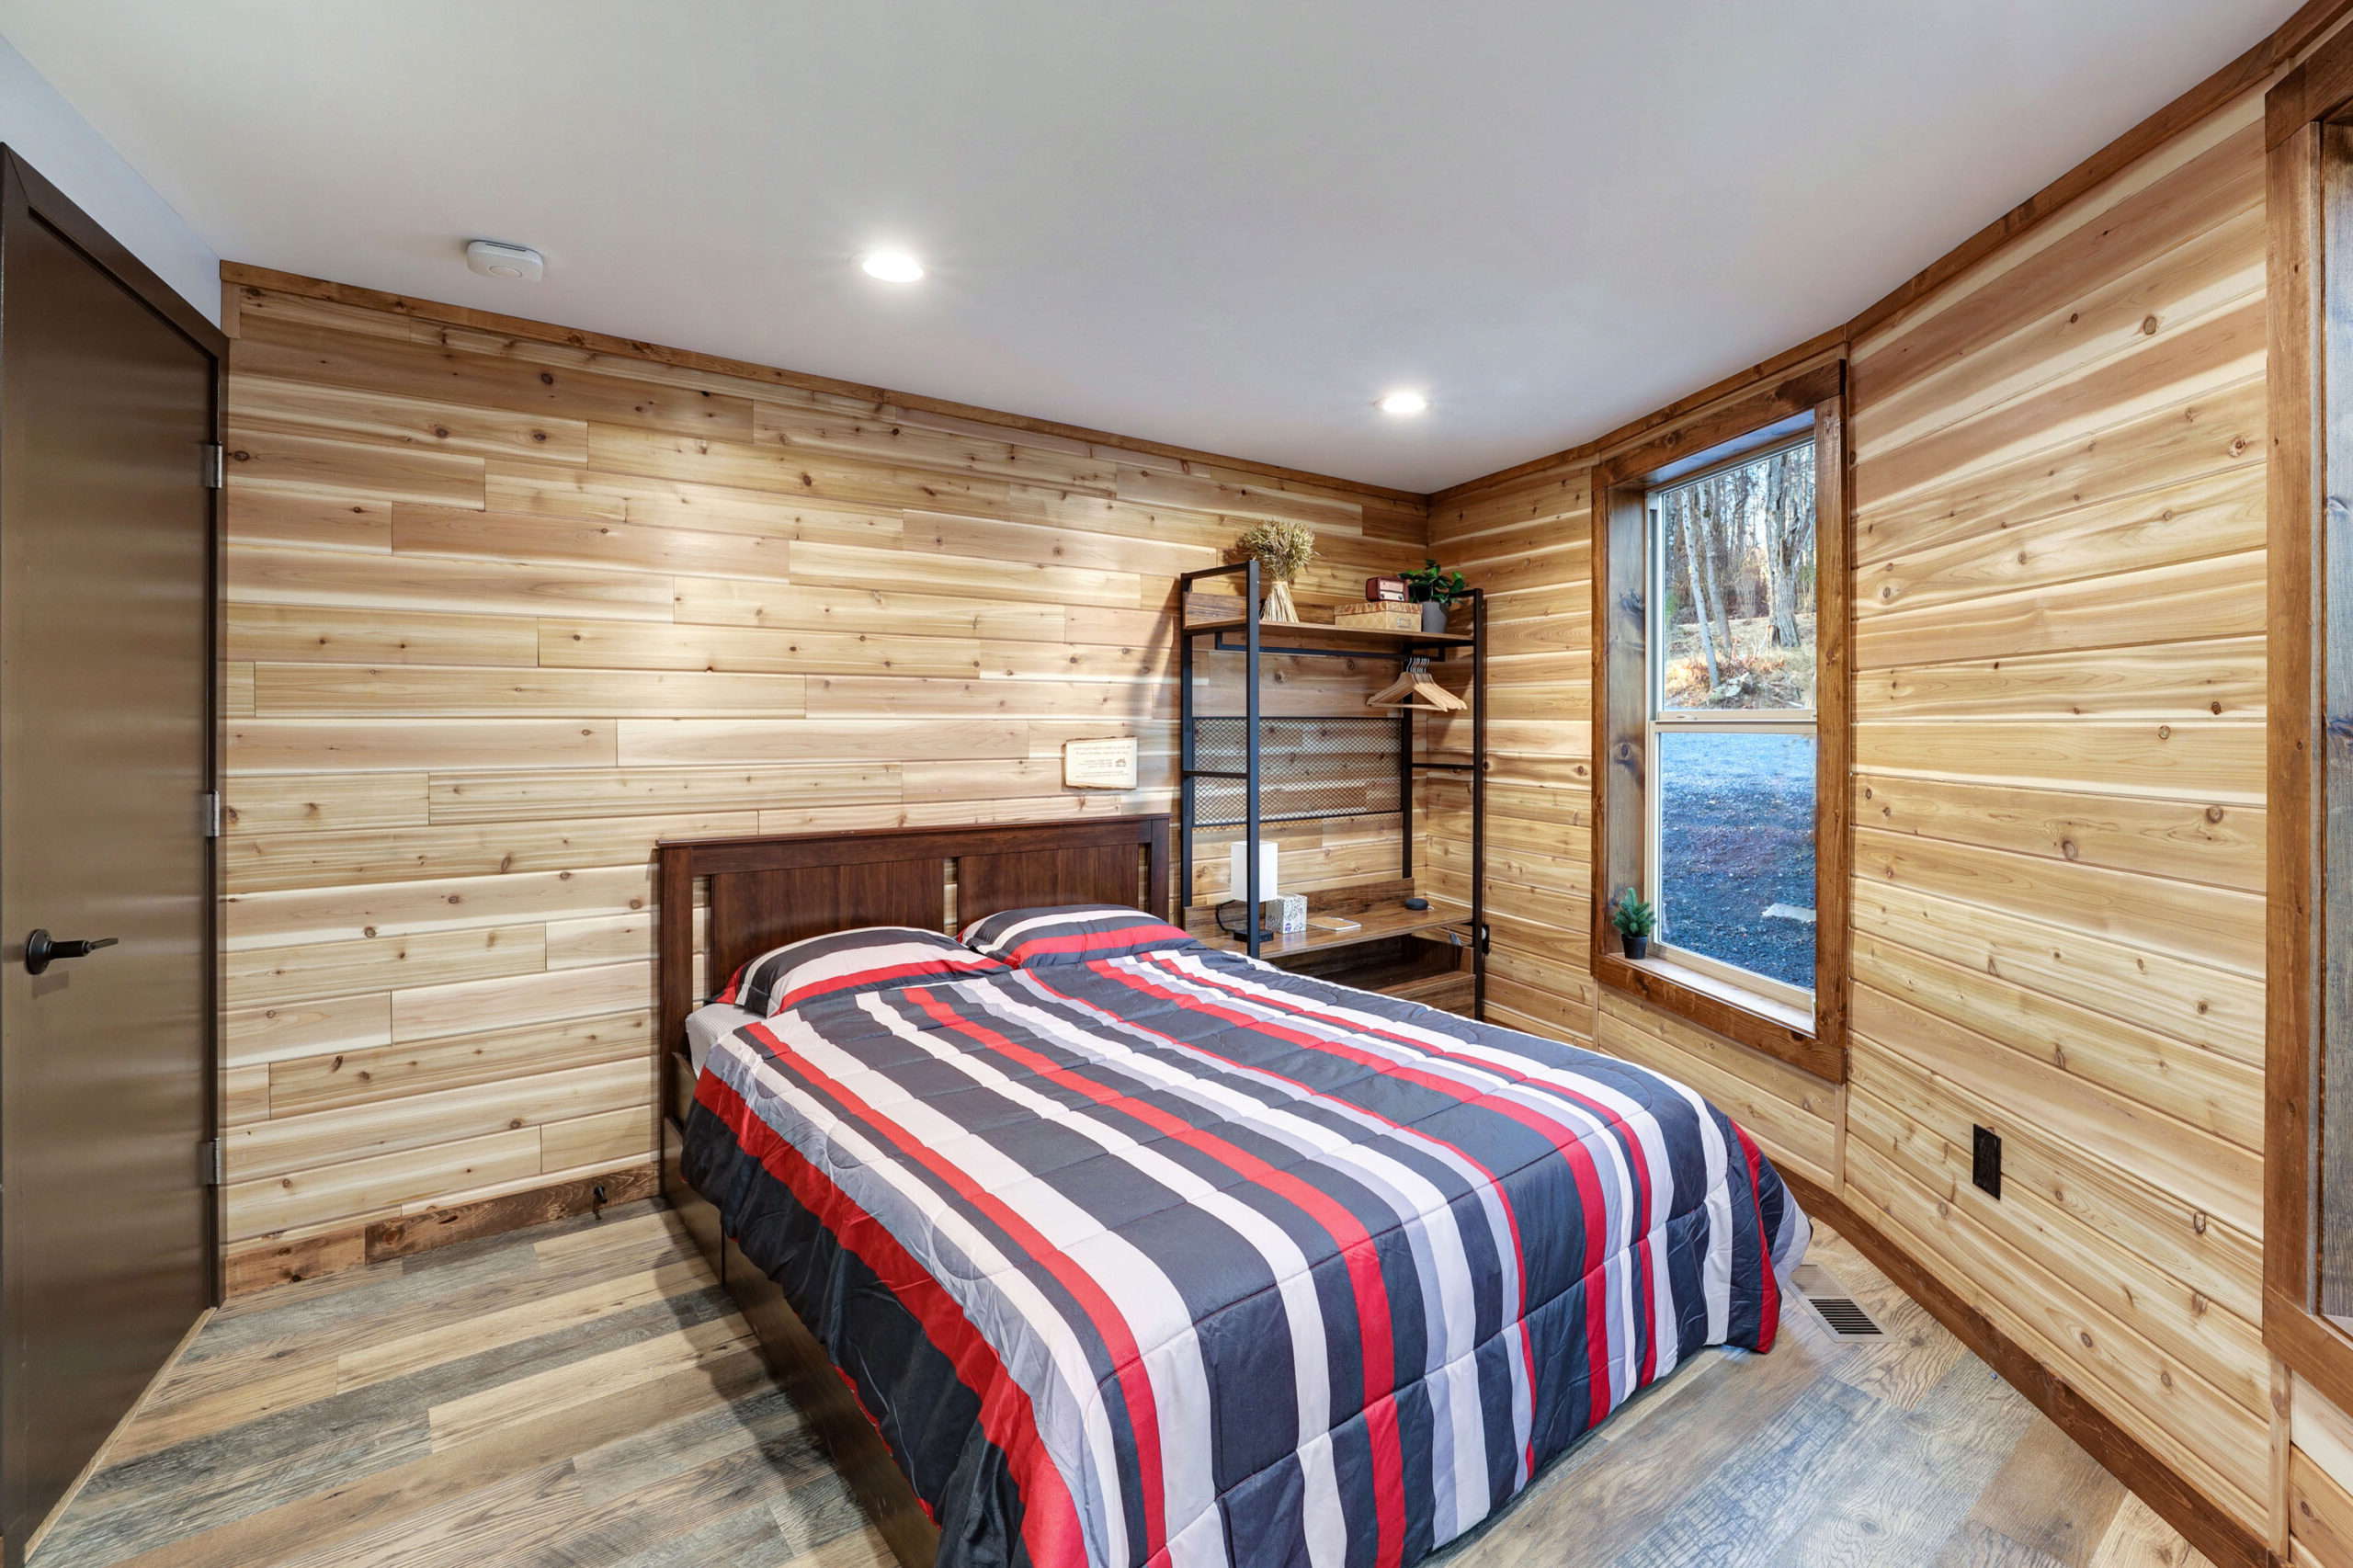 Bedroom #1 with storage, hangers, shelves, comfortable queen size bed, height-adjustable pillows, and USB A and C charging ports. -- Skyline Yurt, Skyline Cabin